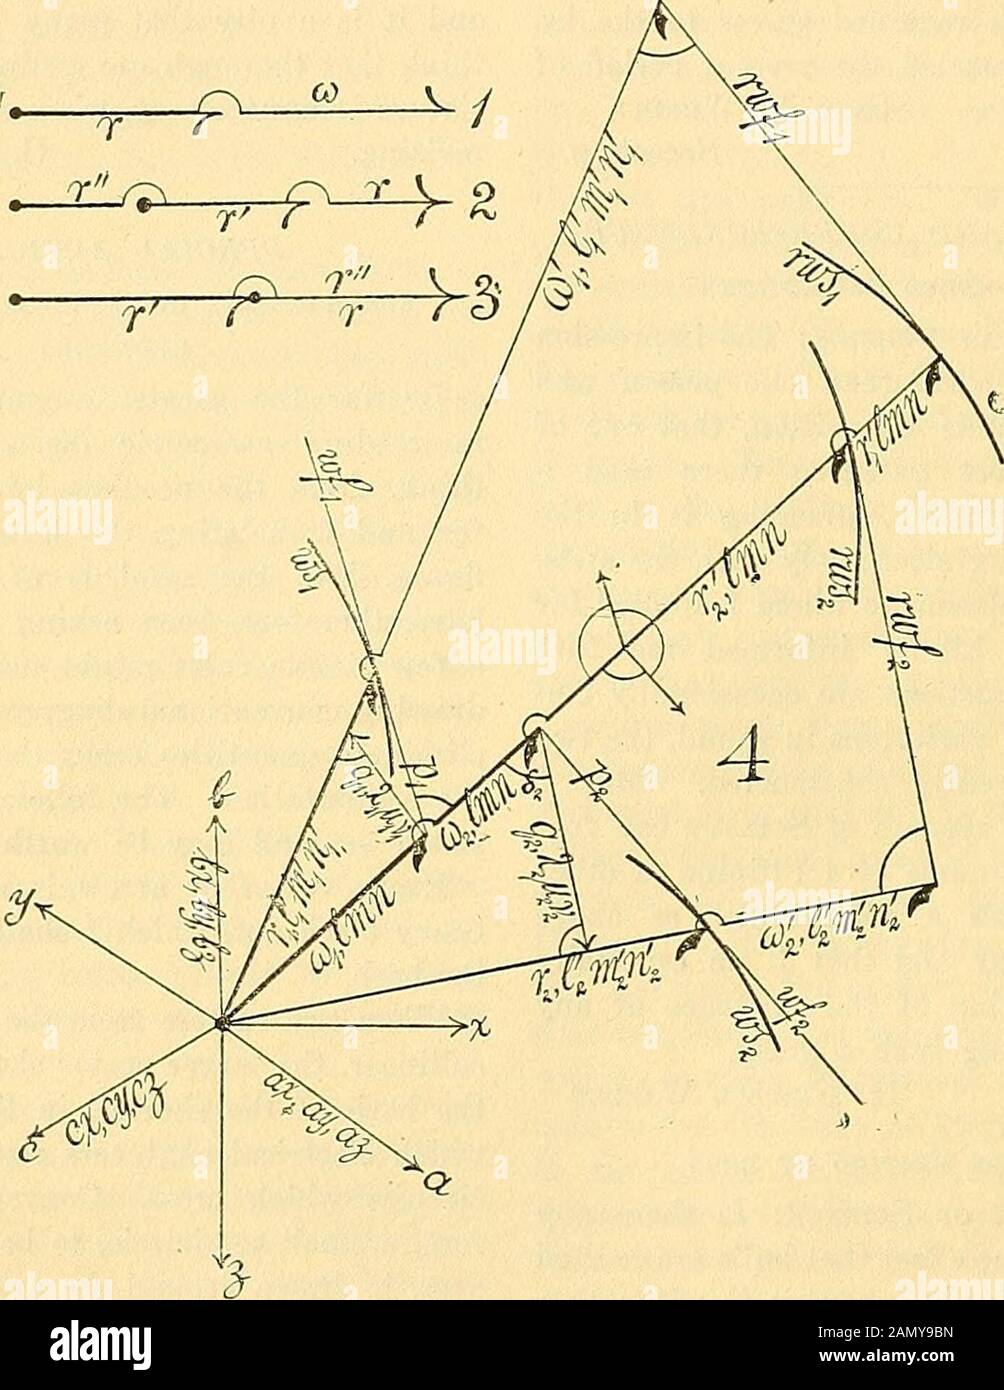 Science . and the letter orspecification of the vector placed near thebarb and (when necessary for clearness) onthe same side of the shaft with the barb andstep-over. Where several vectors coincide theline may be thickened. Eight angles should be indicated by an arcjoining the line. Other angles marked. 150 SCIENCE [N. S. Vol. XXVI. No. 657 When two coincident vectors, have not thesame origin, both the but and barb of onevector must be stepped over, as in Fig. 2.Each letter refers to the whole vector betweenthe next but and the nest barb in order, oneither side of it. Thus in Fig. 2, r and rco Stock Photo